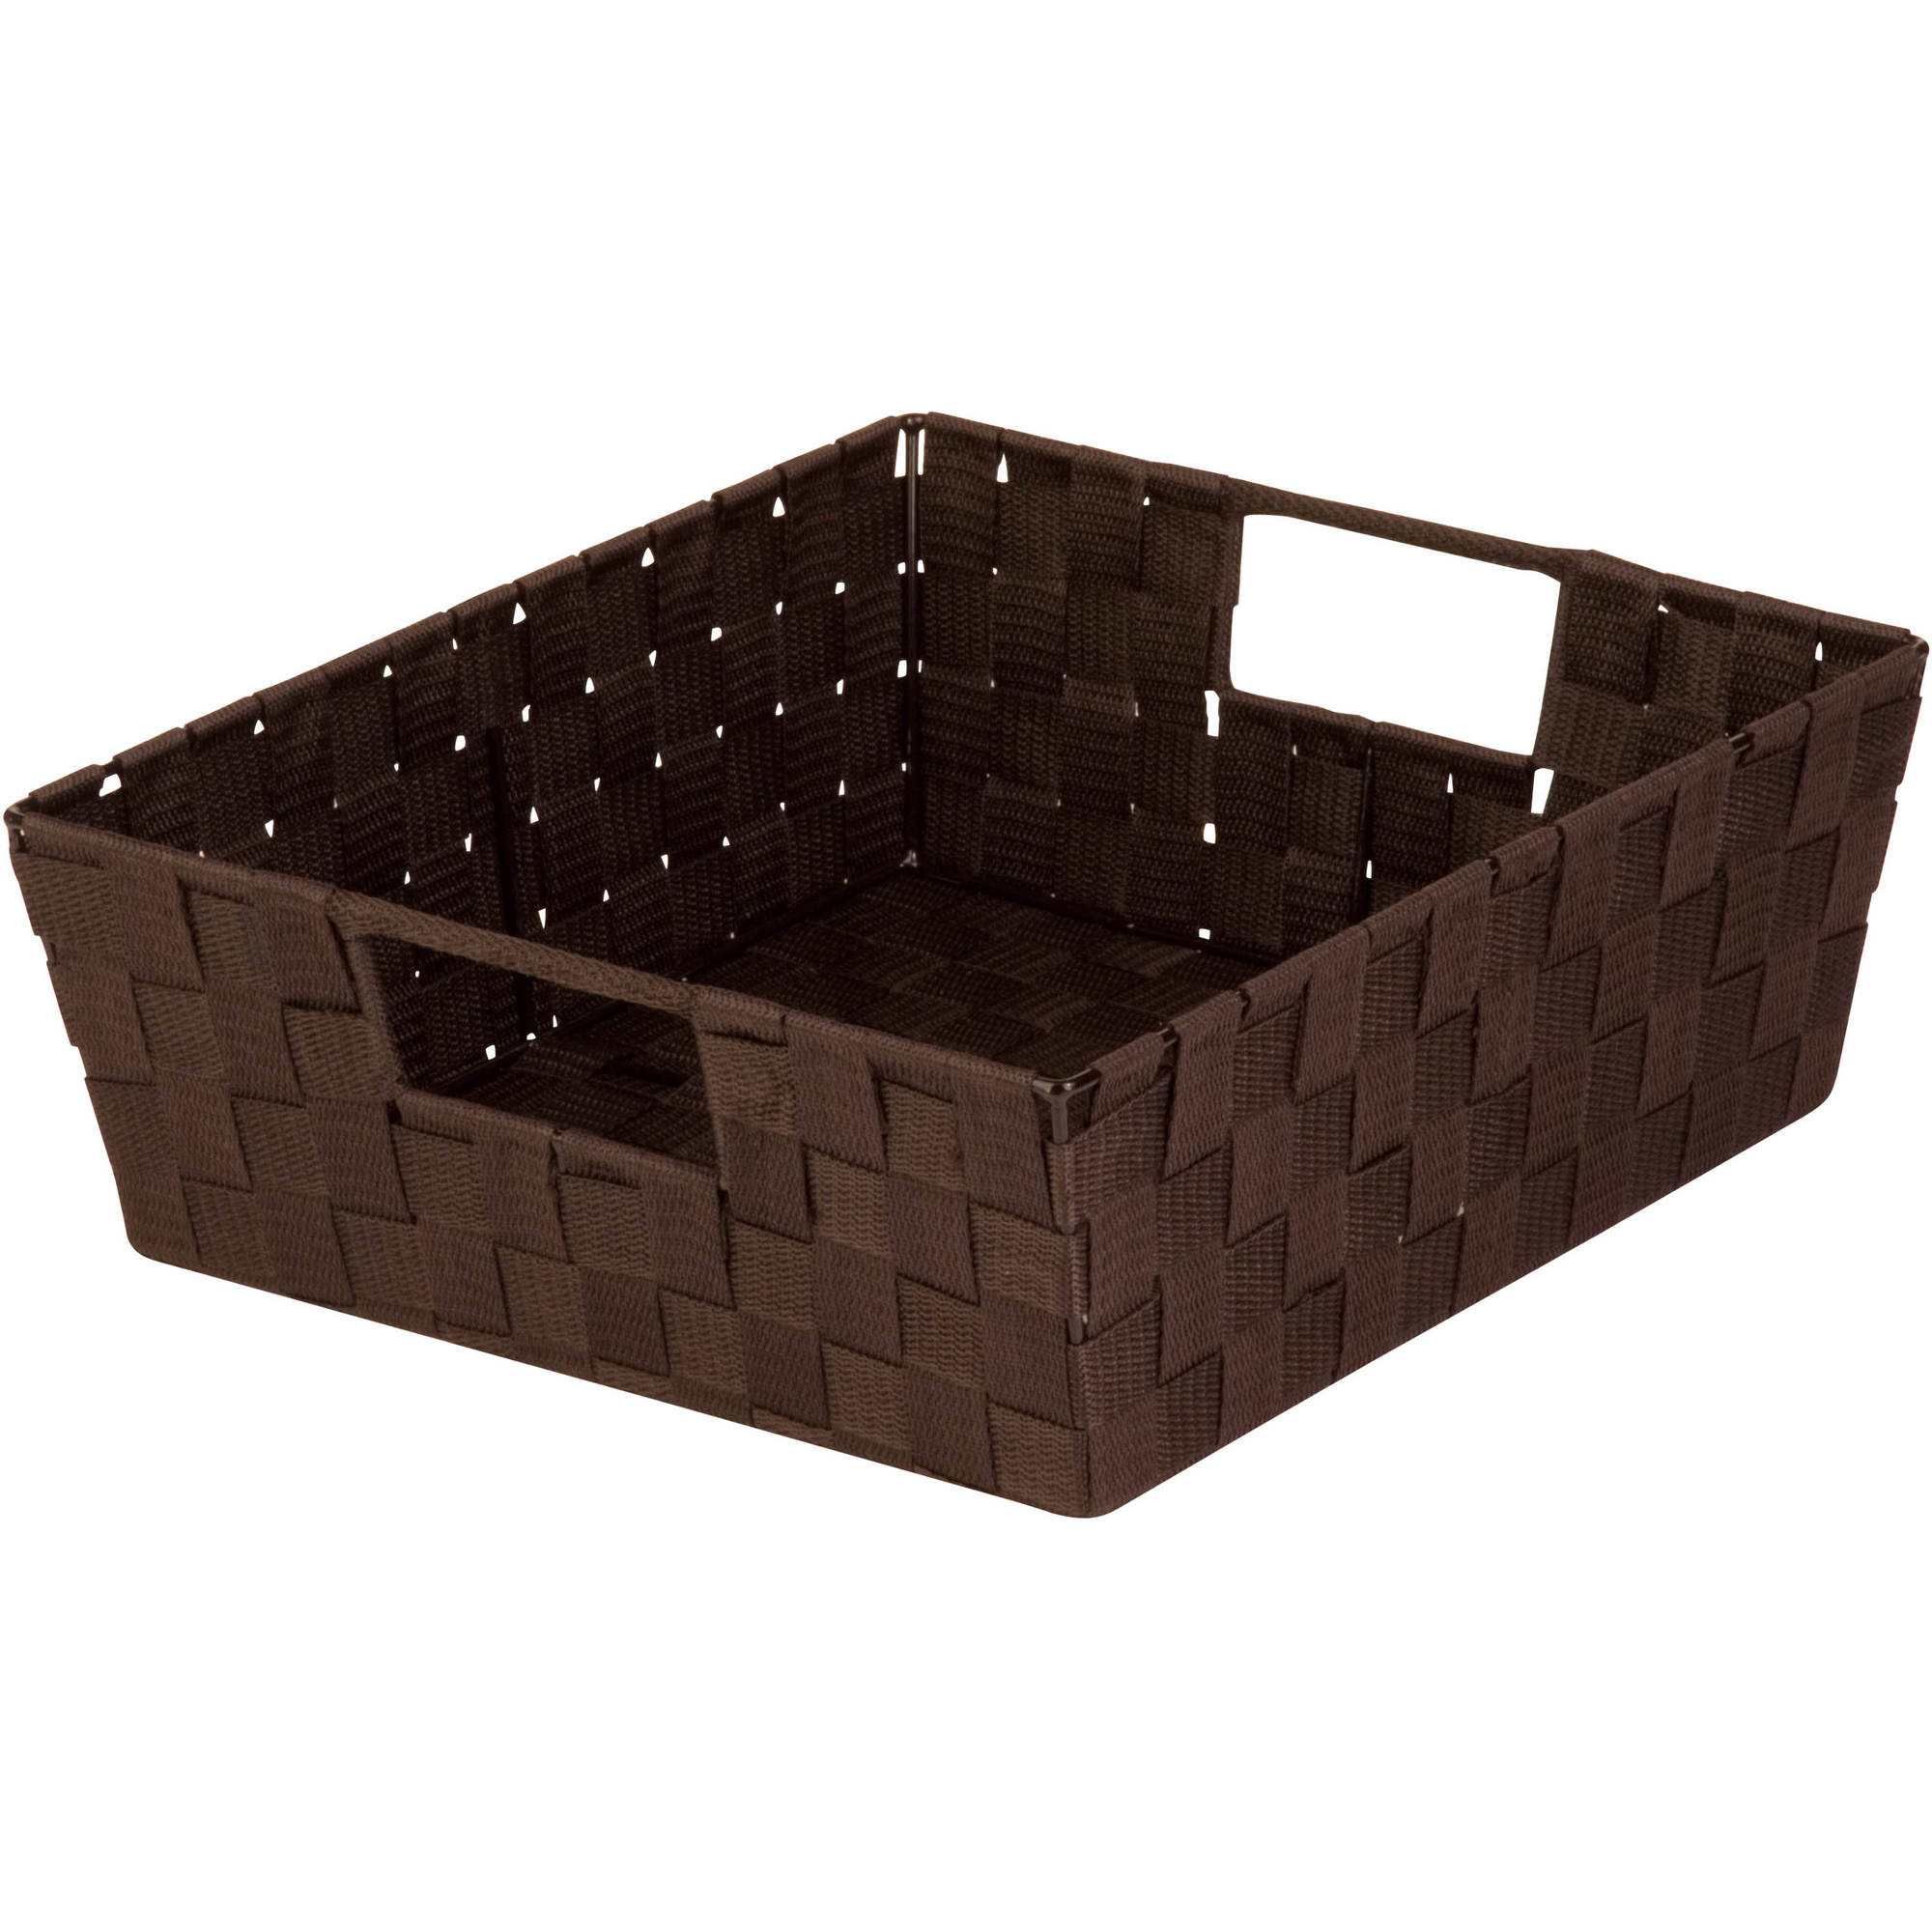 Honey Can Do Woven Basket with Handles and Iron Frame, Espresso Black - image 2 of 2